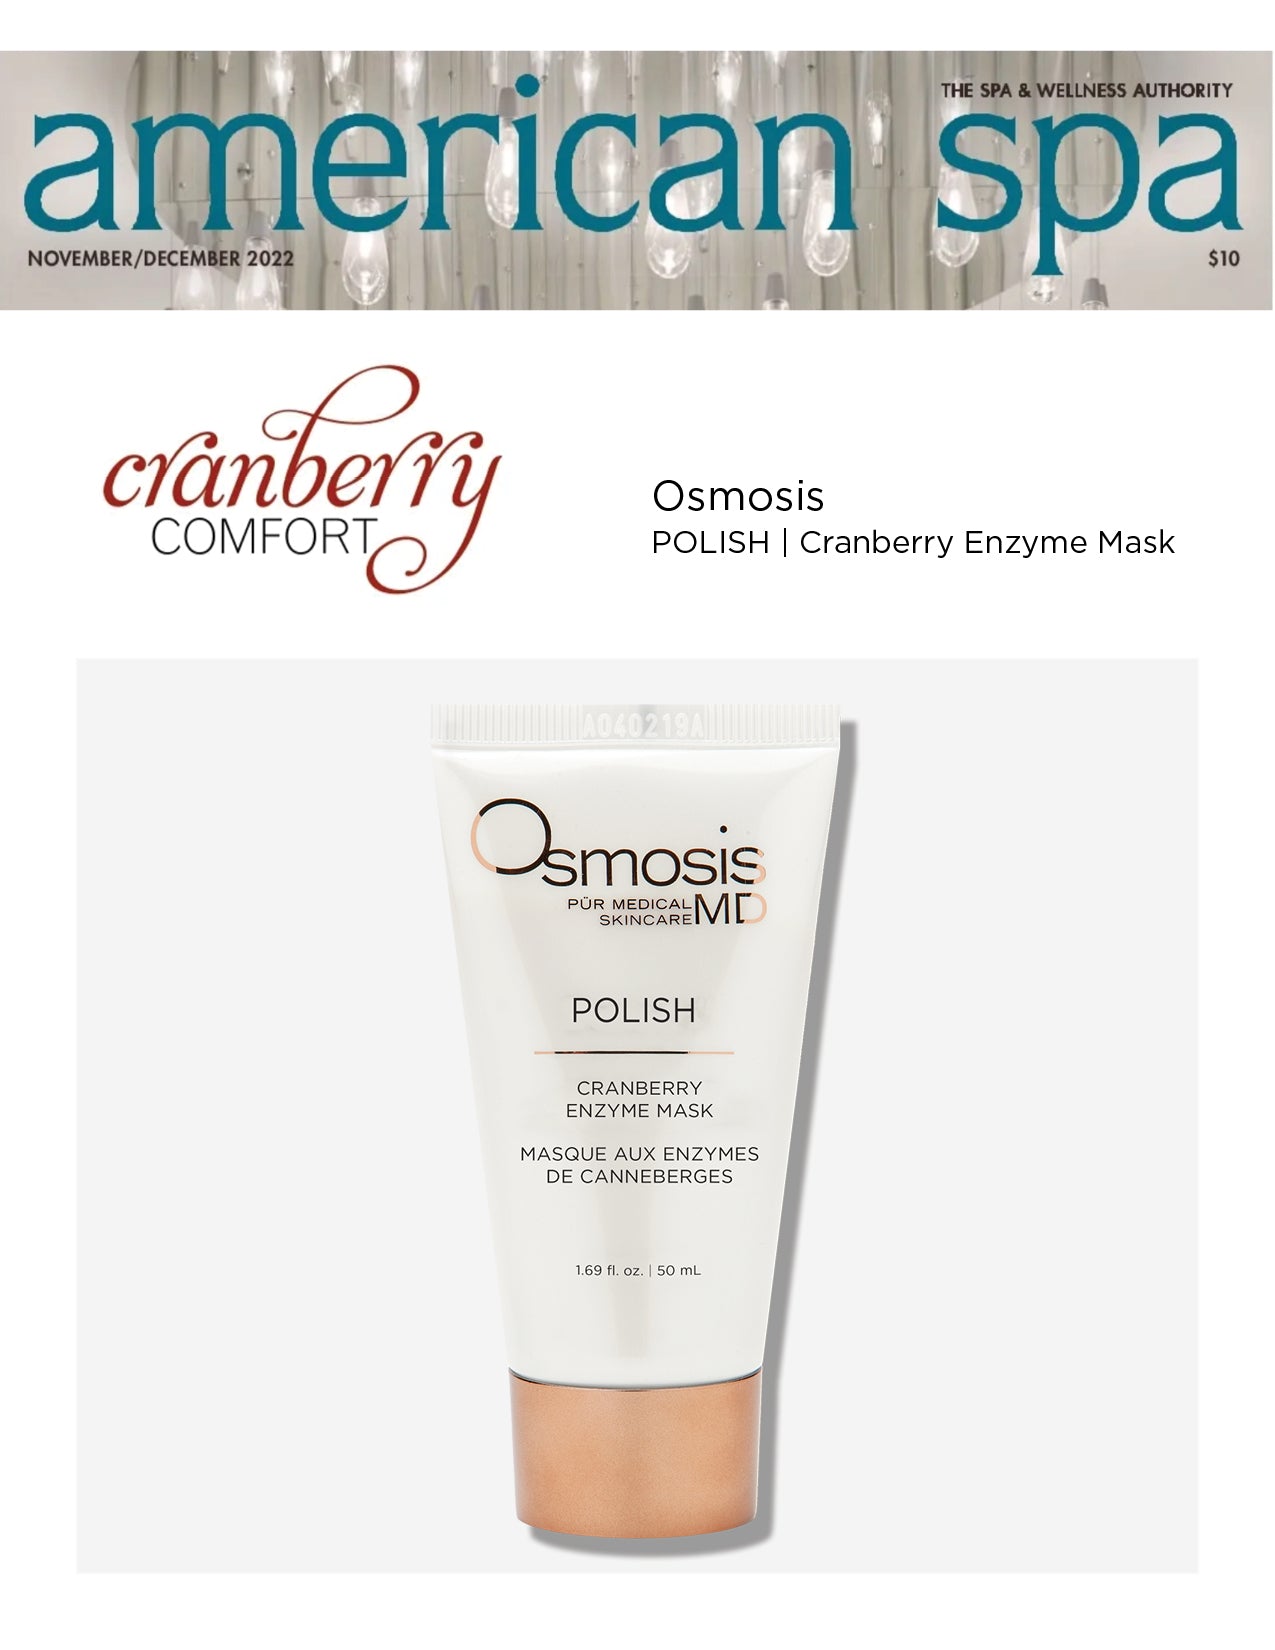 Polish Cranberry Enzyme Mask is included in American Spas roundup of Cranberry Comfort products